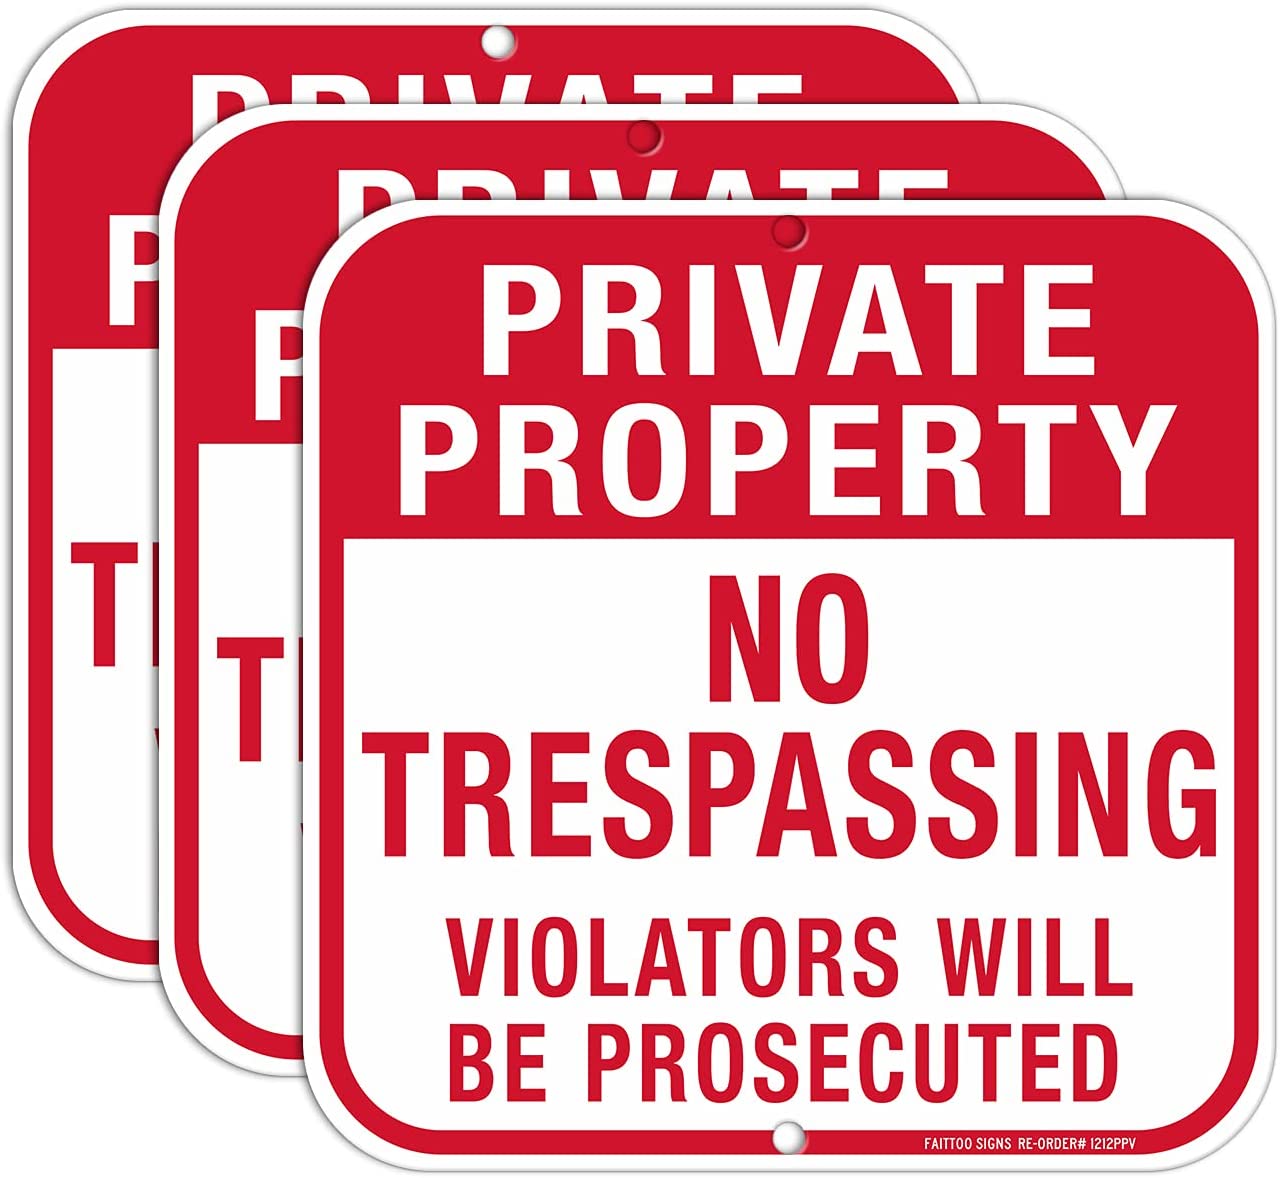 Private Property No Trespassing Sign, Violators Will Be Prosecuted Sign, 12 x 12 Inches Square, .040 Rust Free Aluminum, UV Protected and Waterproof, Weather Resistant, Durable Ink, Easy to Mount